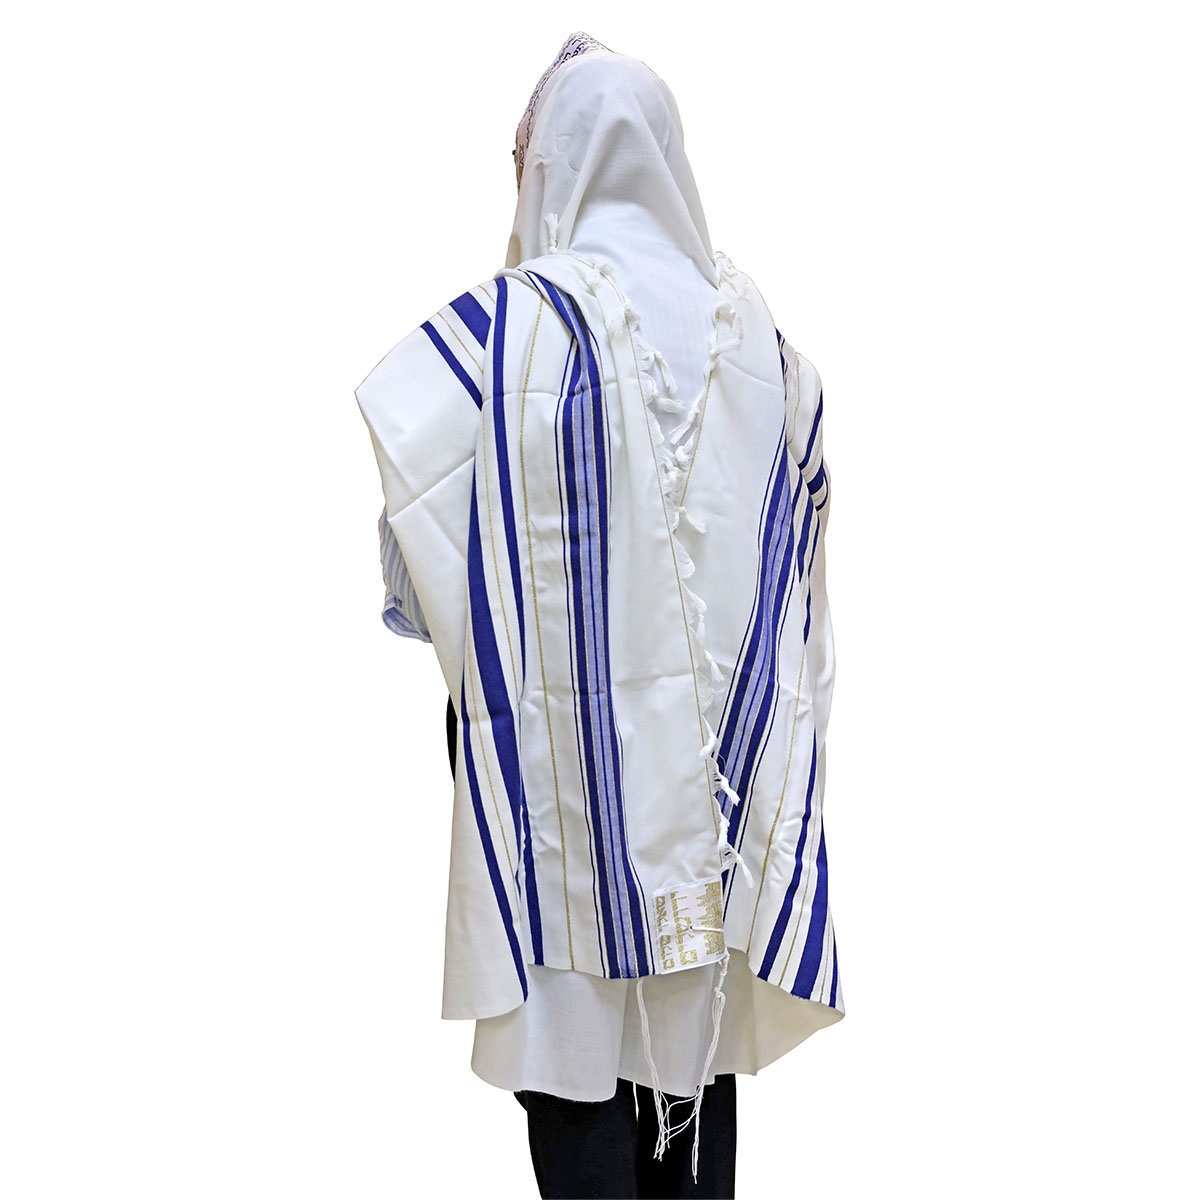 The tallit with tzitzit on the corners comes from the traditional